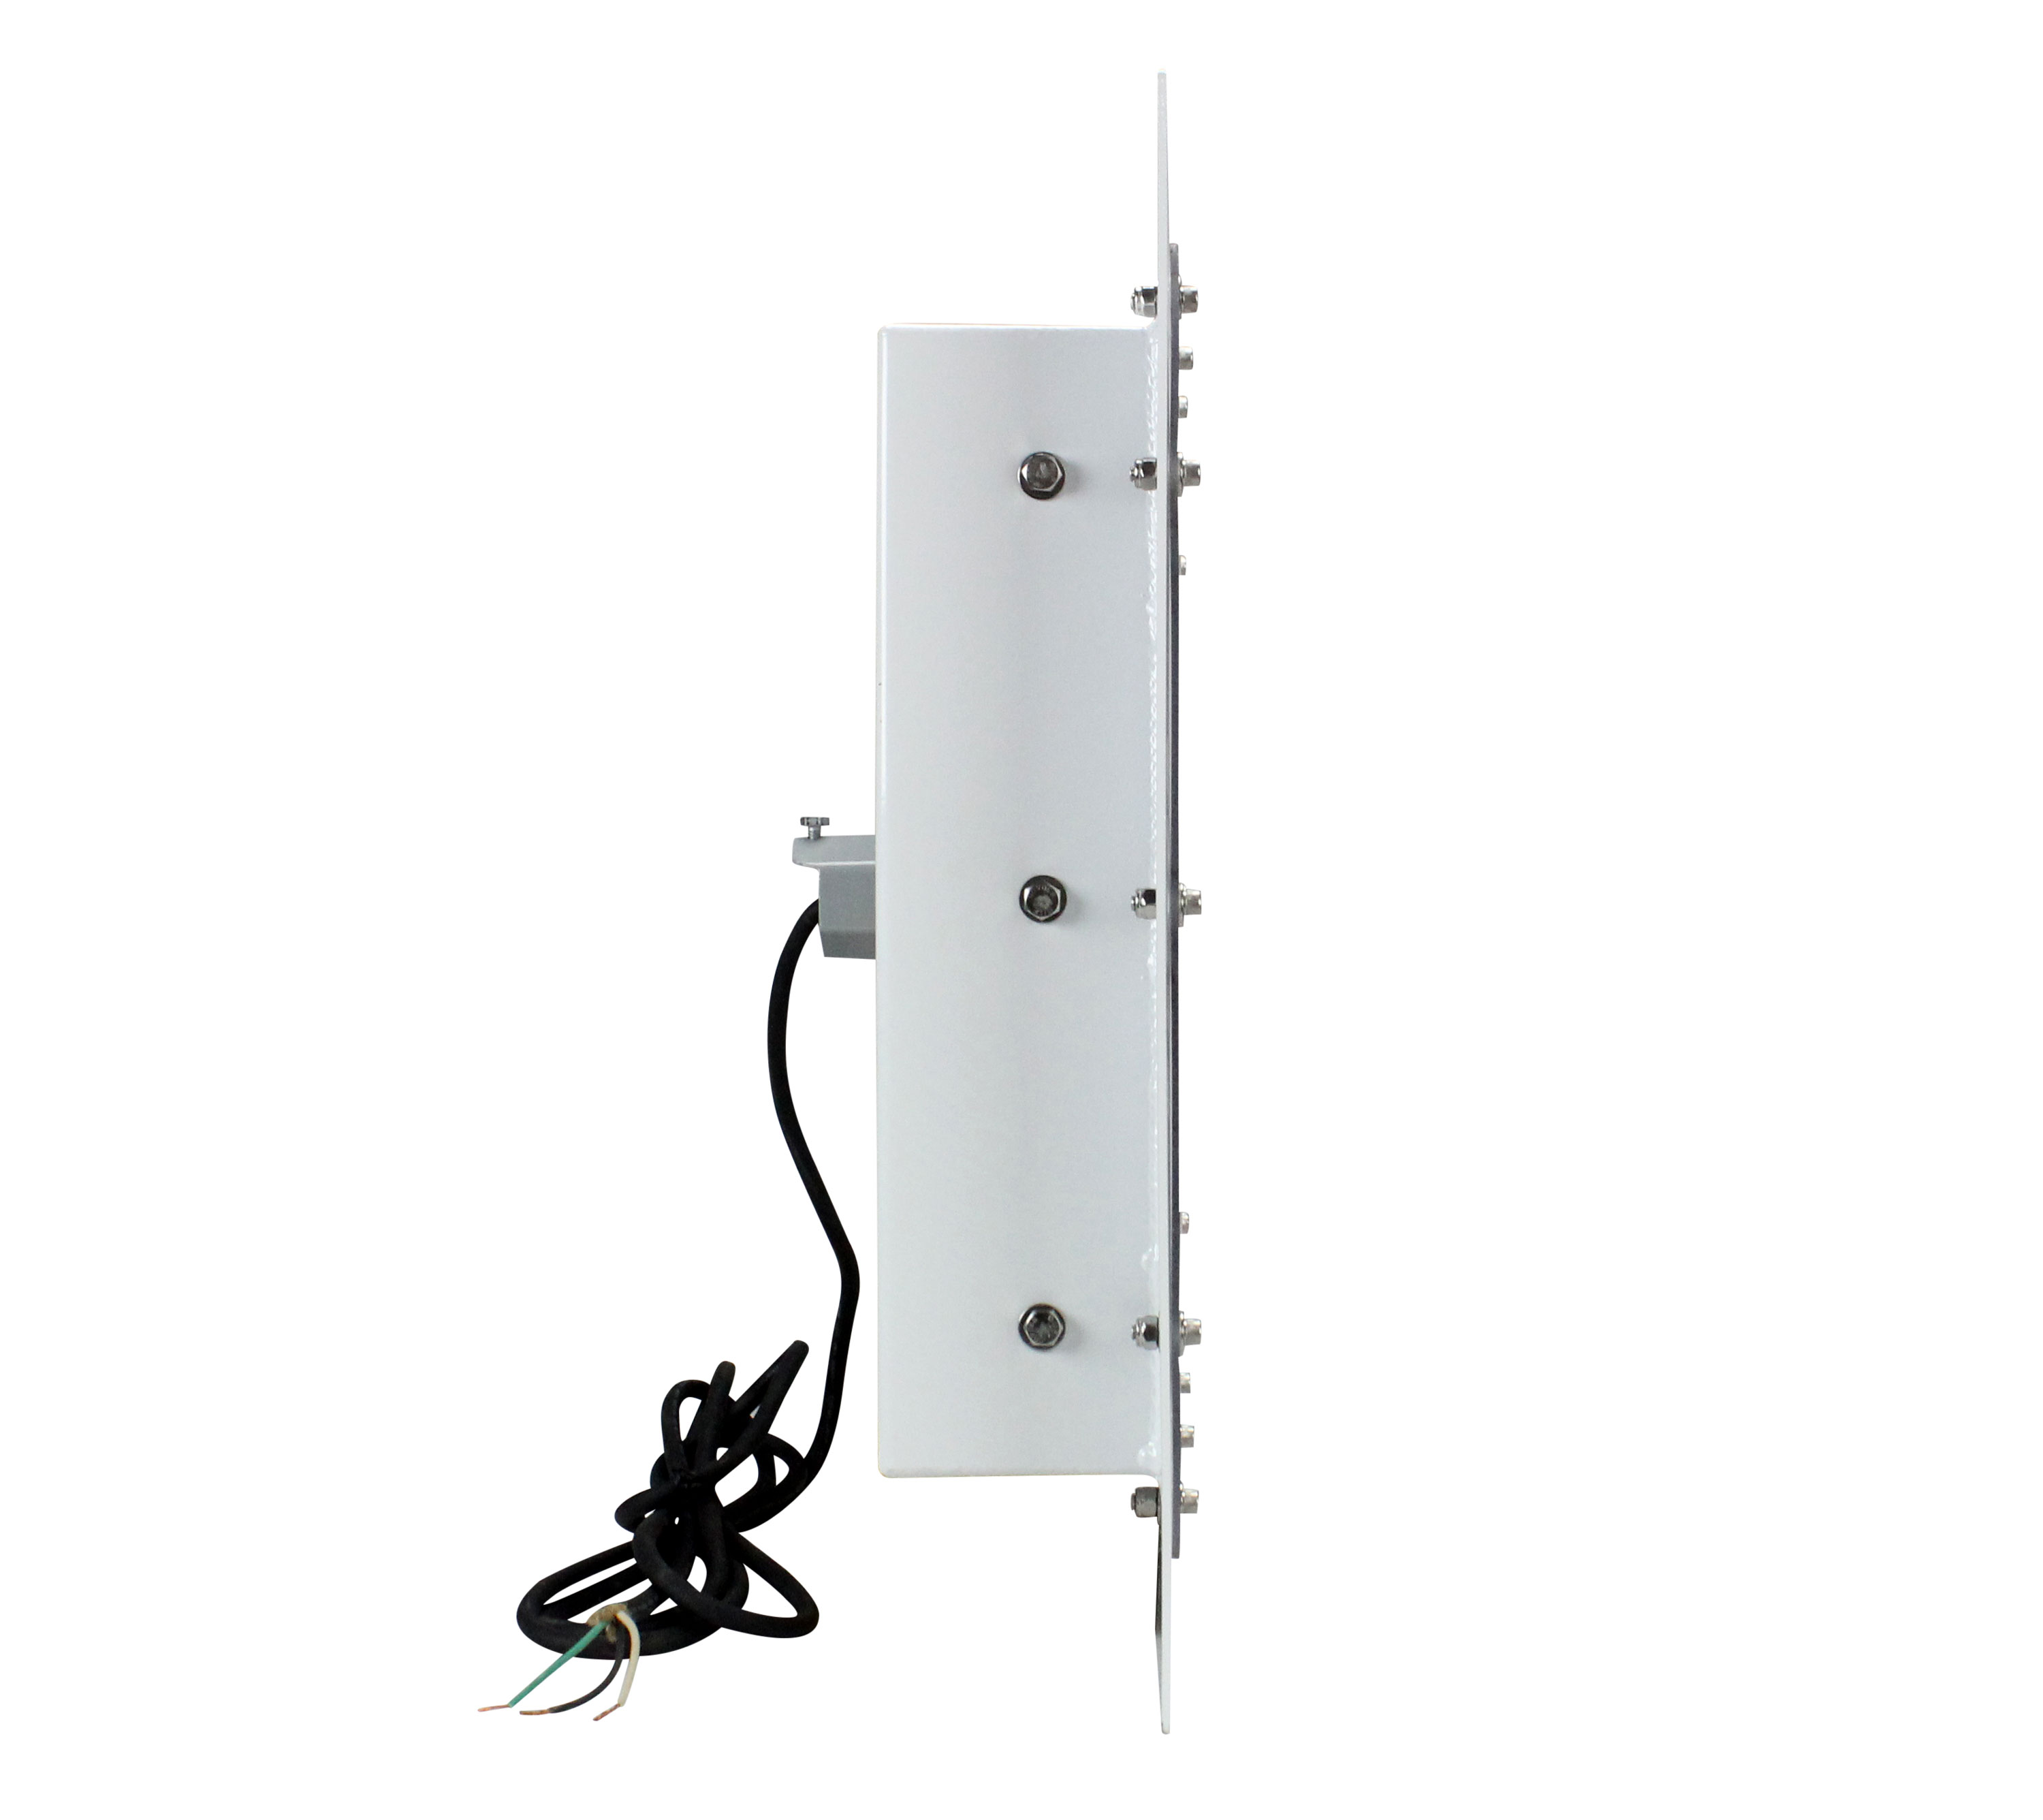 Class 1 Division 1 Hazardous Location LED Light for Recessed Mounting